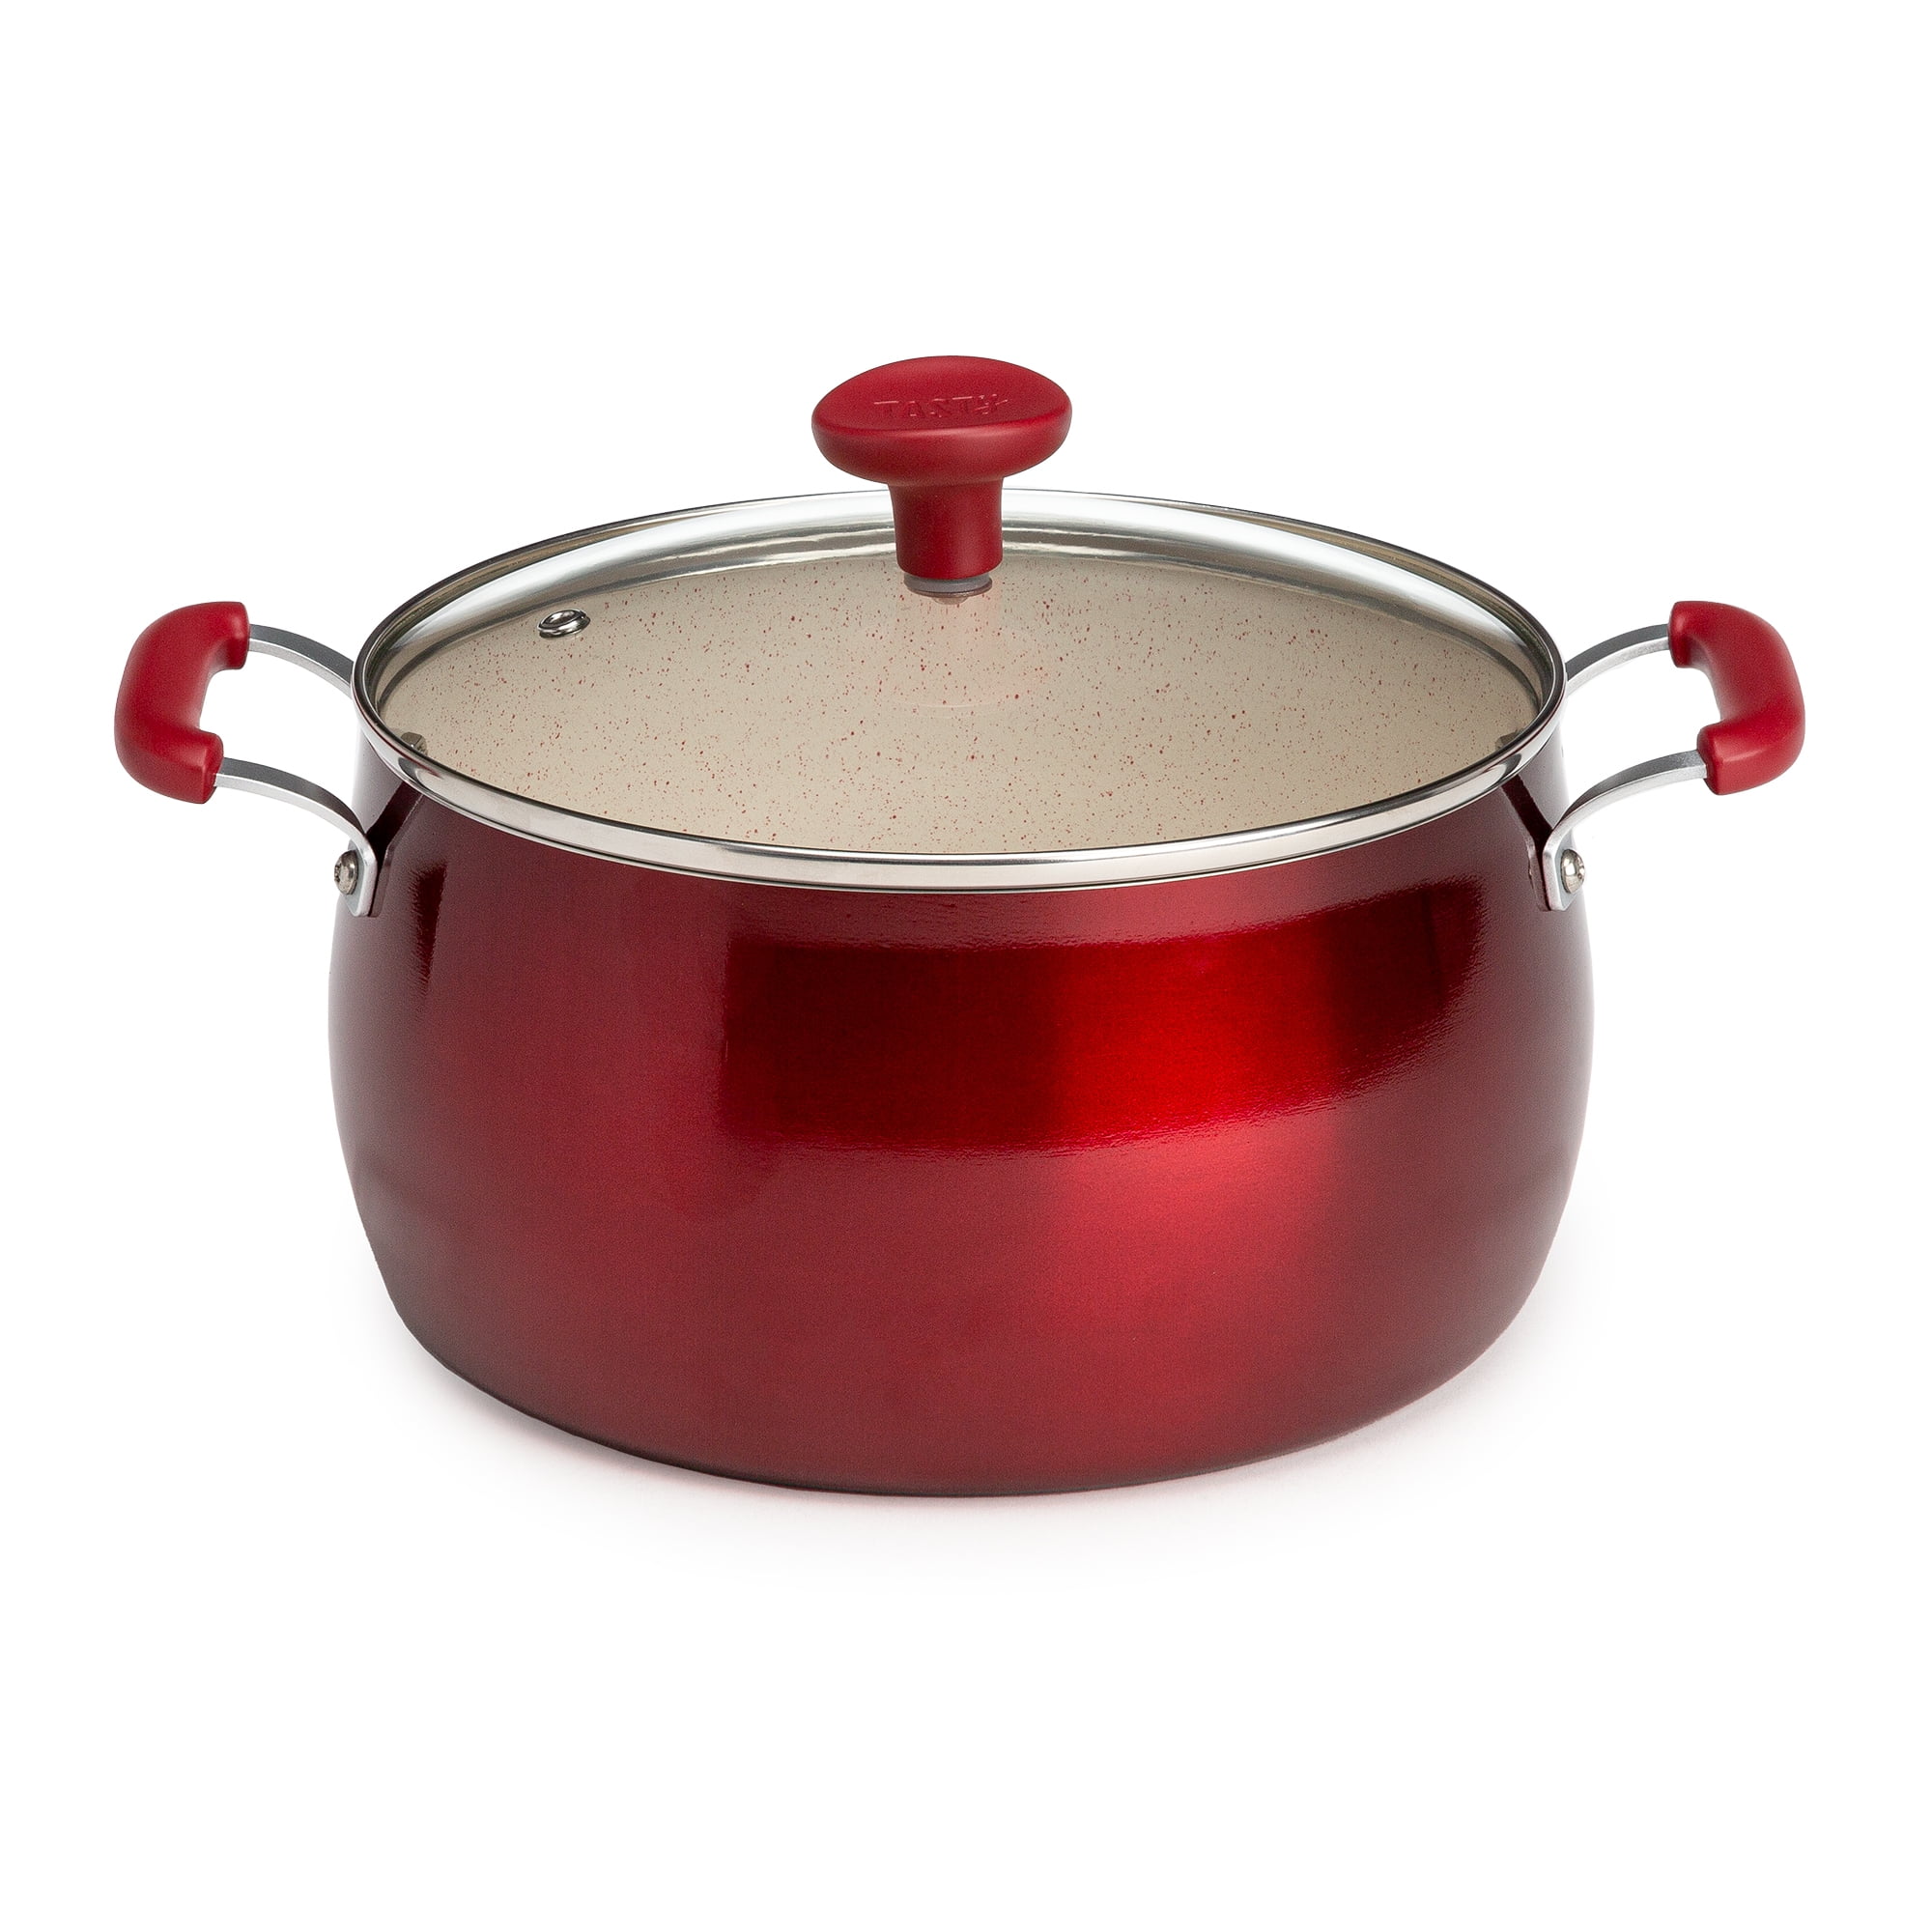 Caraway Nonstick Ceramic Dutch Oven Pot with Lid (6.5 qt, 10.5) - Non  Toxic, PTFE & PFOA Free - Oven Safe & Compatible with All Stovetops (Gas